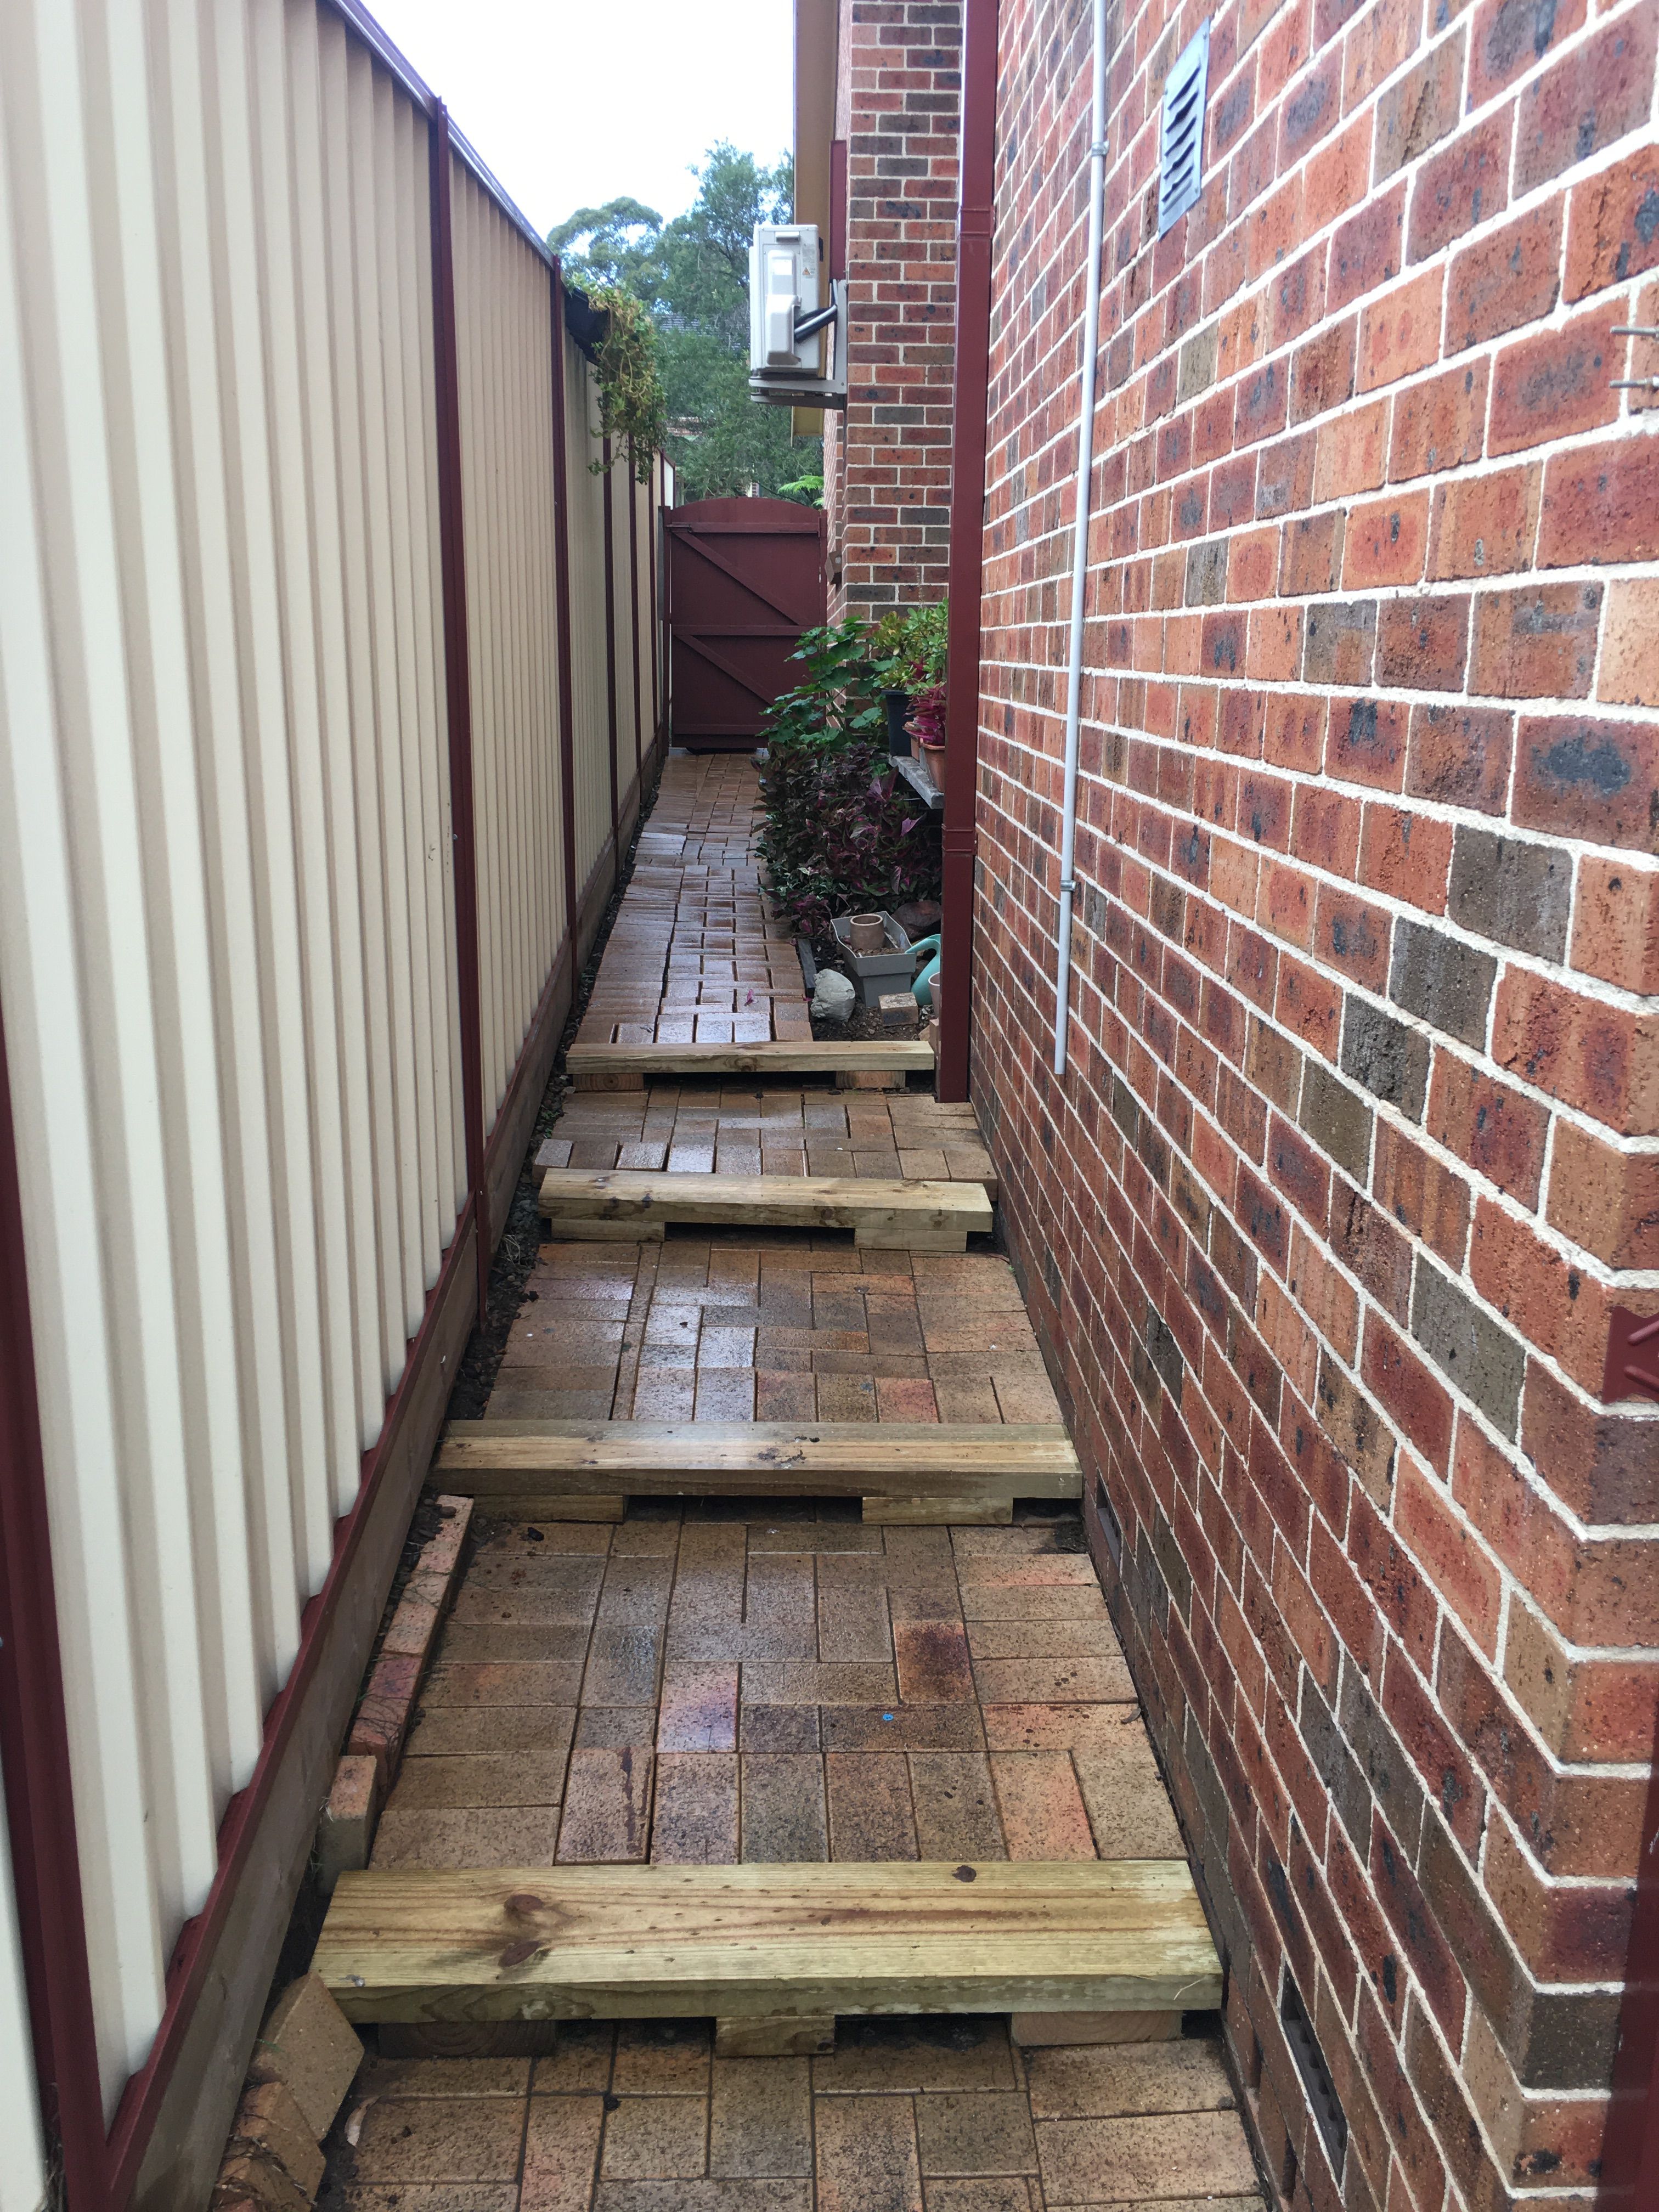 Solved: I need idea for landscaping | Bunnings Workshop community